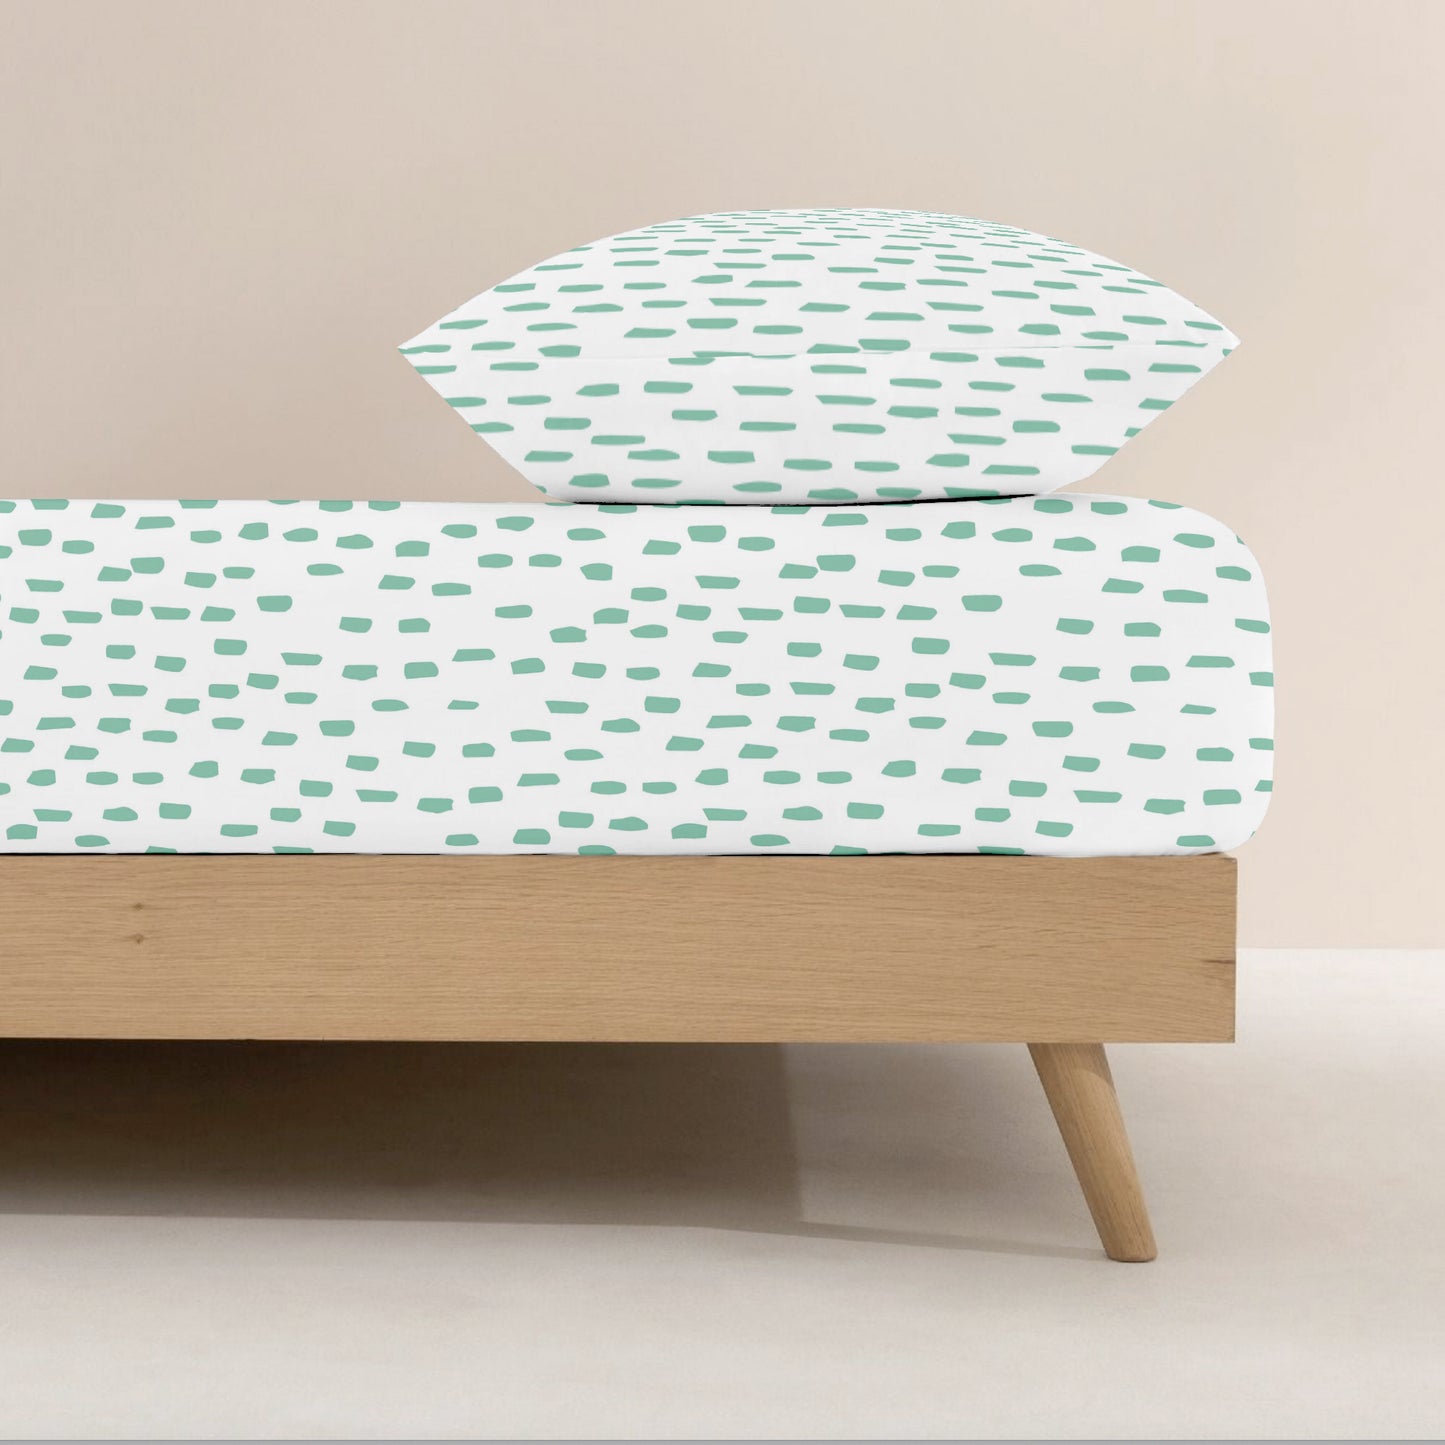 Urko fitted sheet 100% cotton